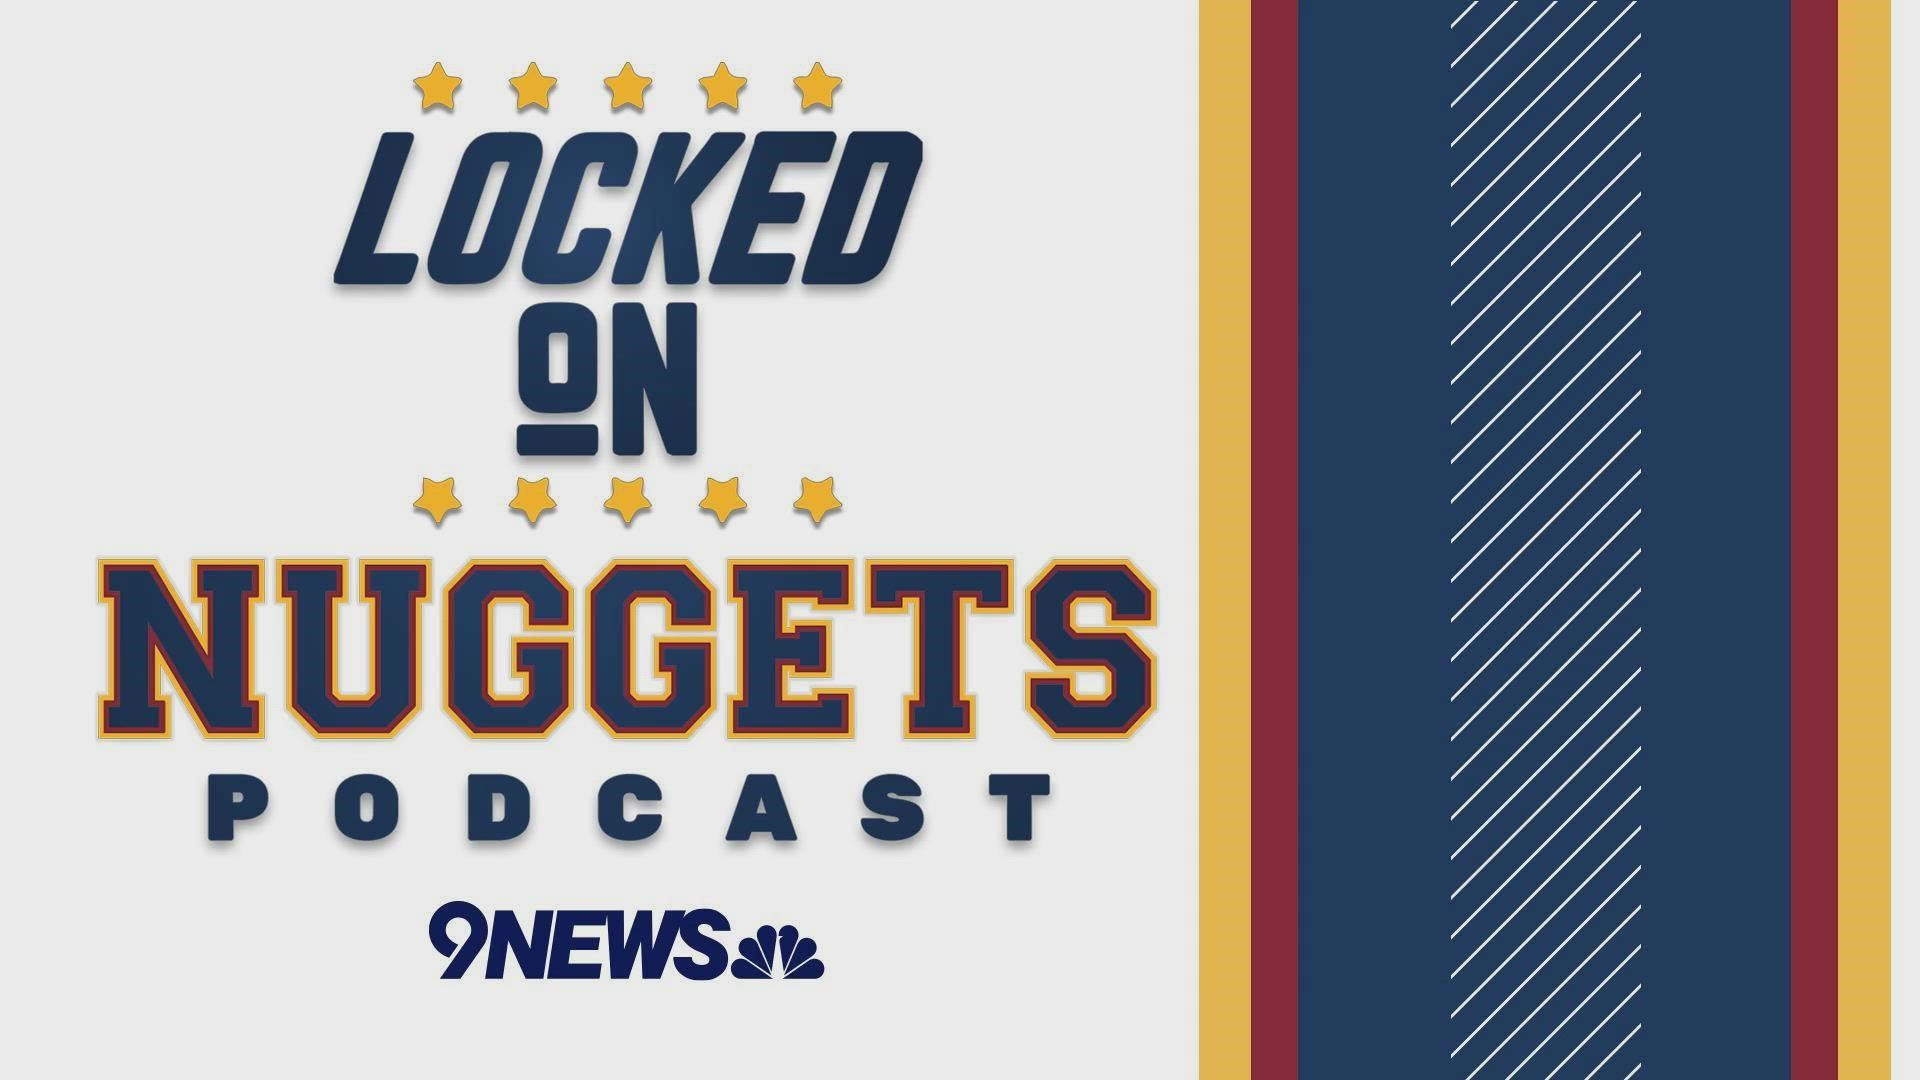 LockedOn Nuggets host Matt Moore and 9NEWS’ Chris Bianchi take a look back on the Nugget's latest season, and Moore gives insight on the team's next moves.